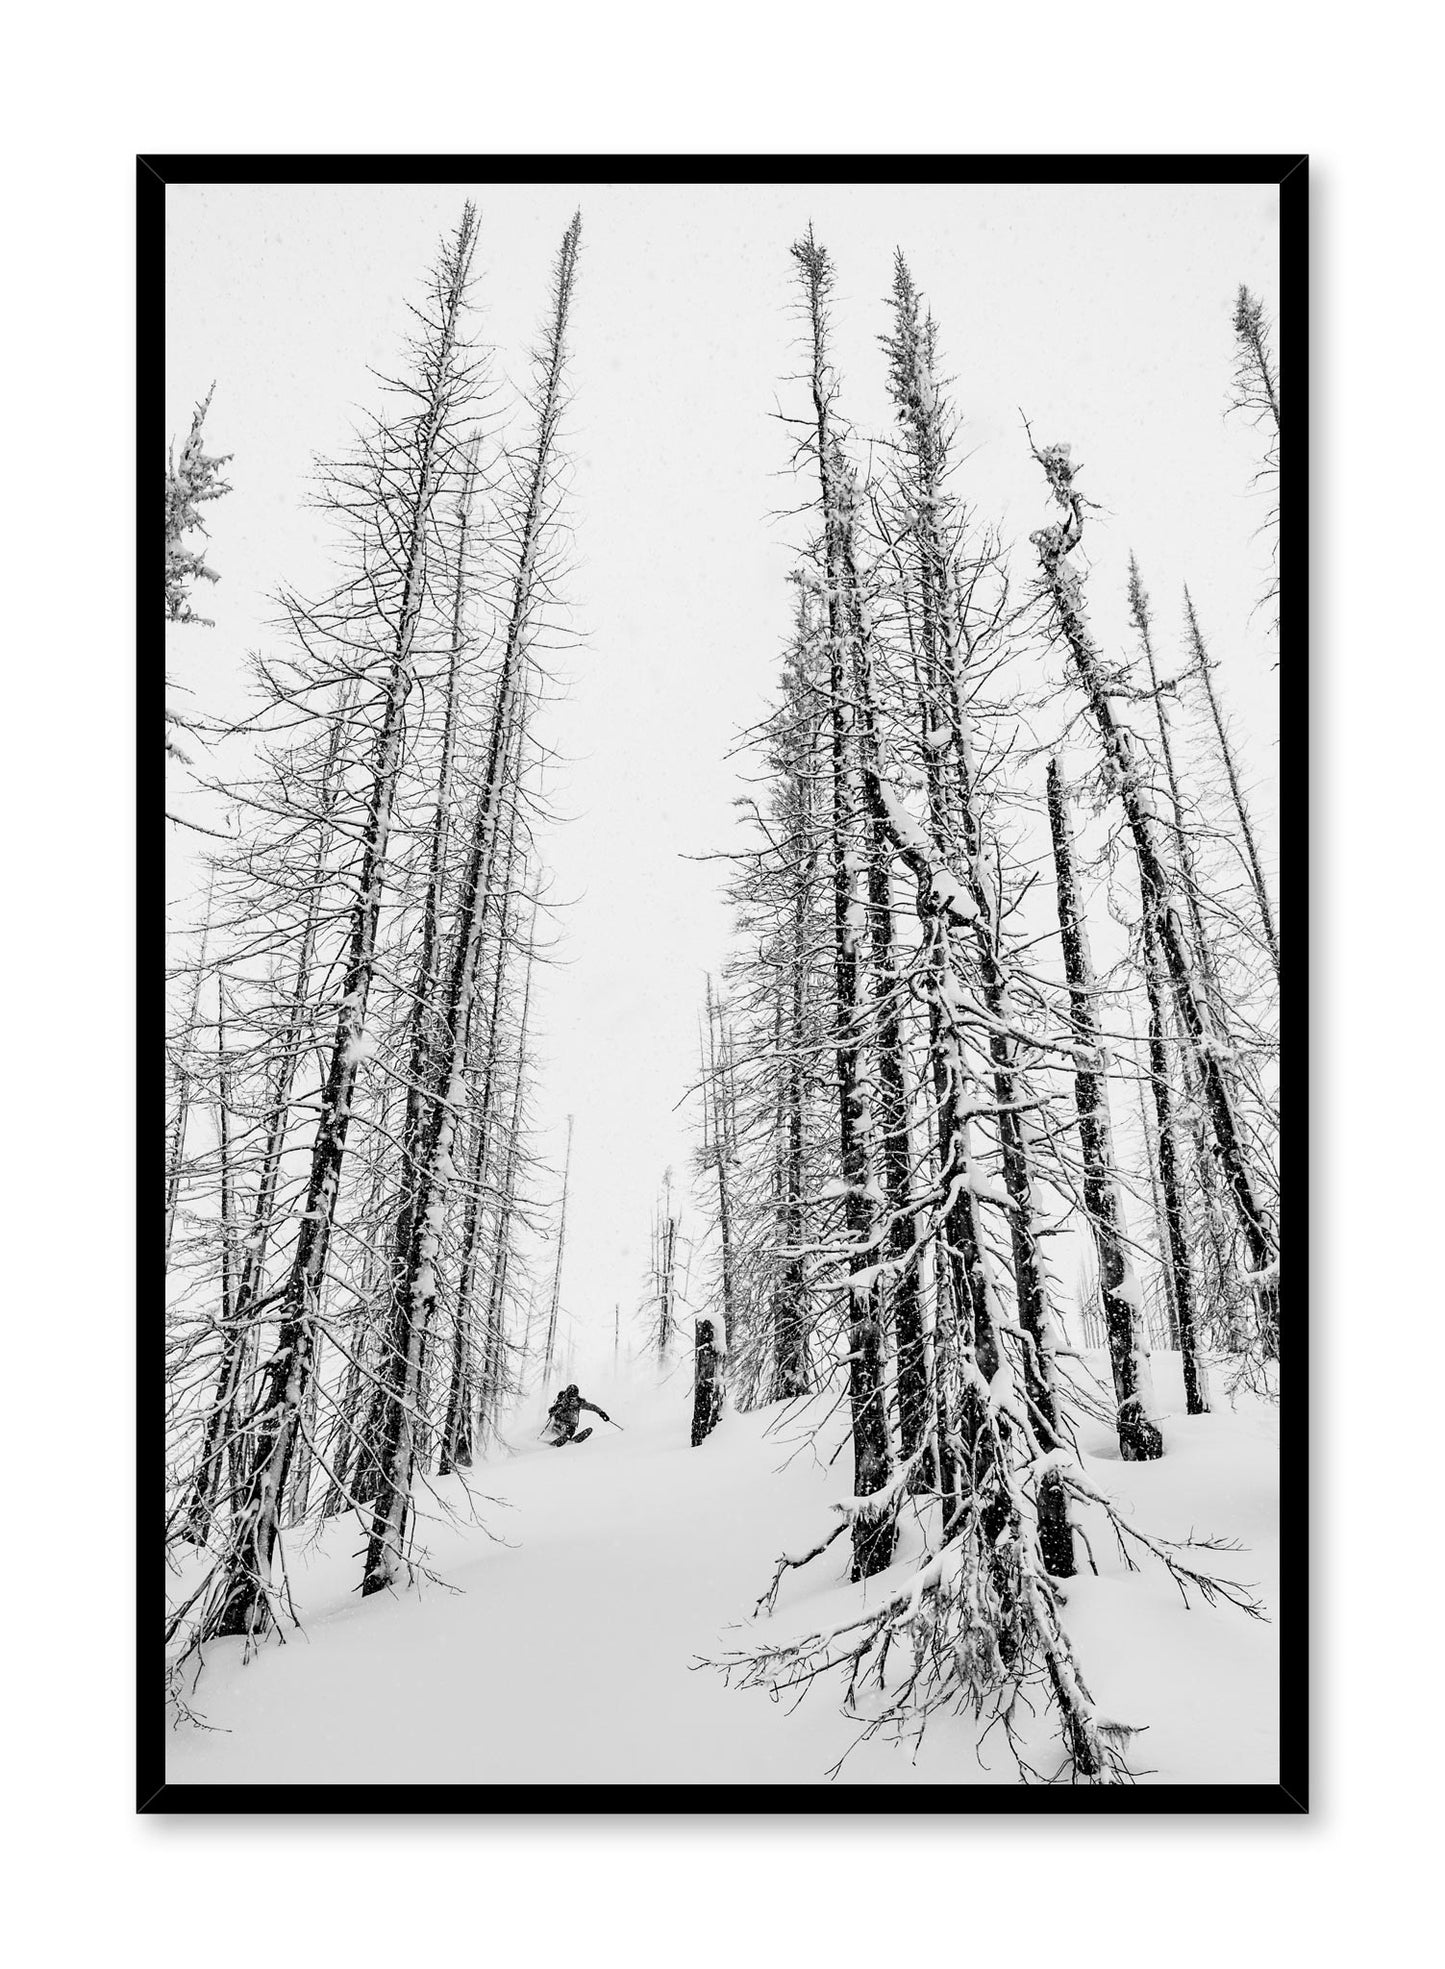 Landscape photography poster by Opposite Wall with trees in snow